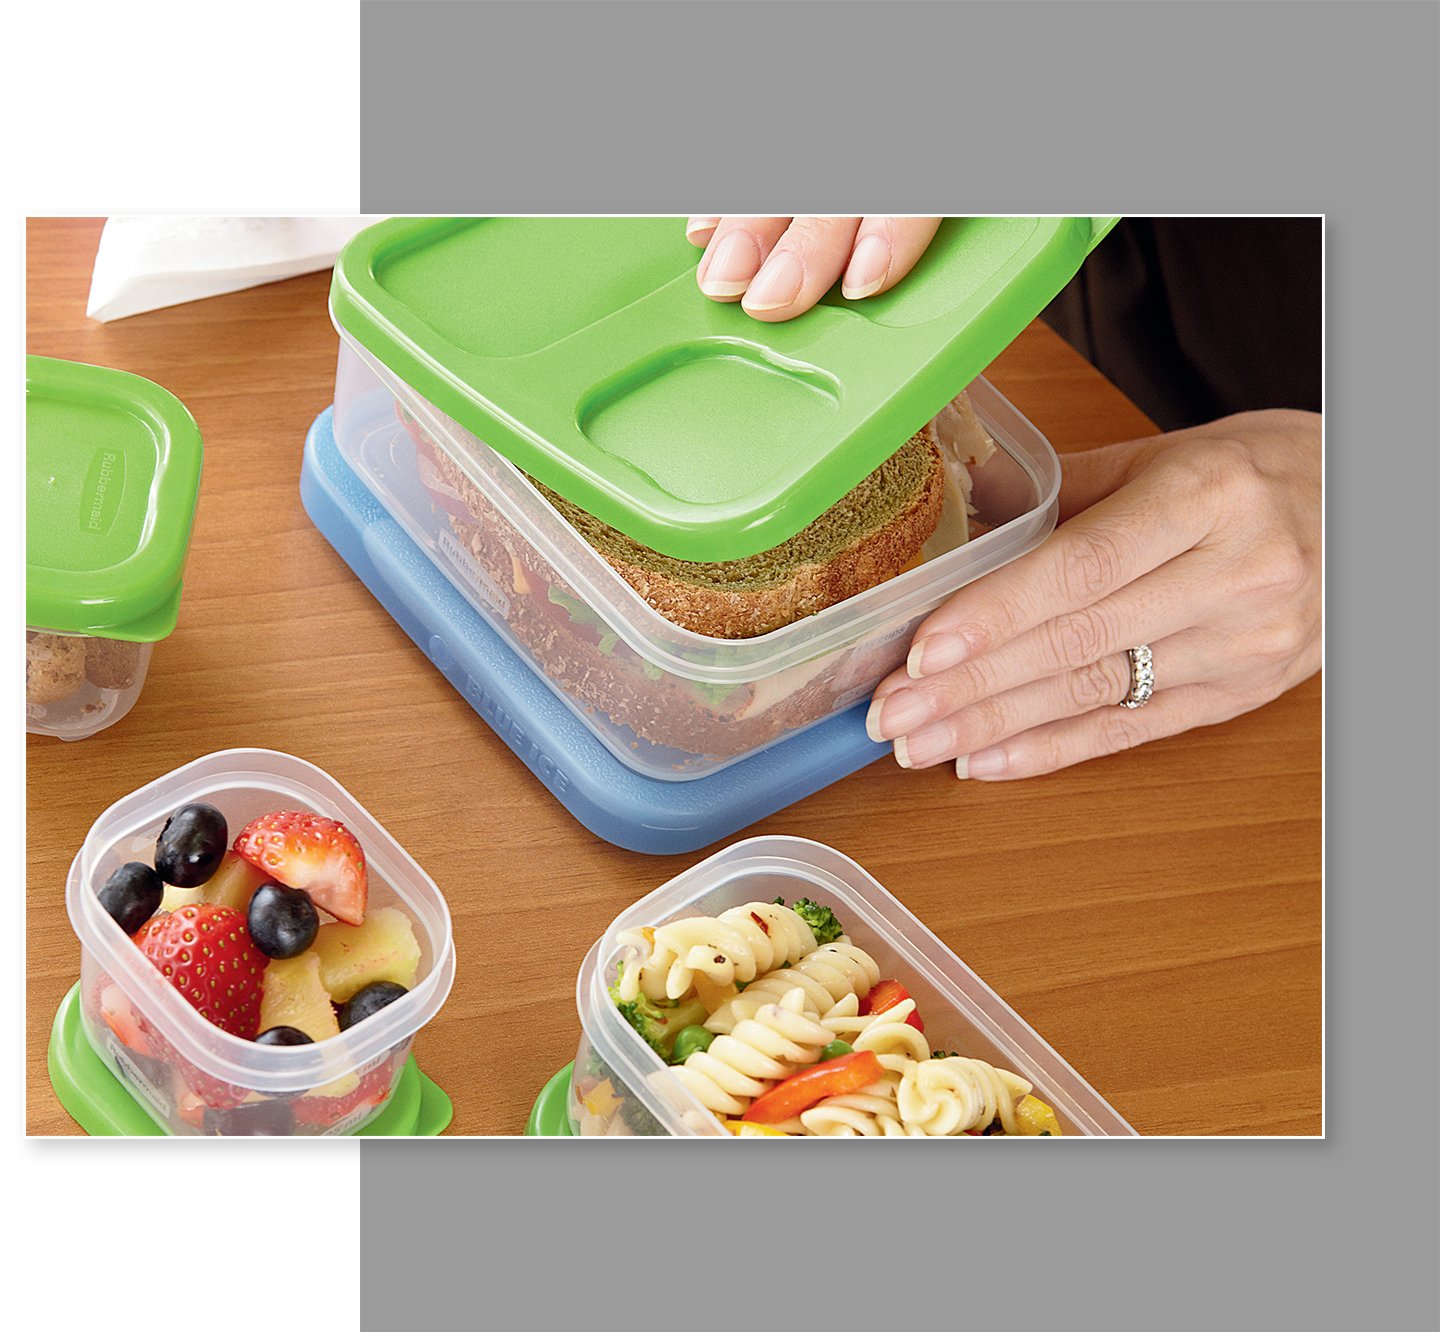 Details about   RUBBERMAID LUNCH BLOX BOX KIT KIDS W/BLUE ICE CONTAINER FOOD STORAGE 